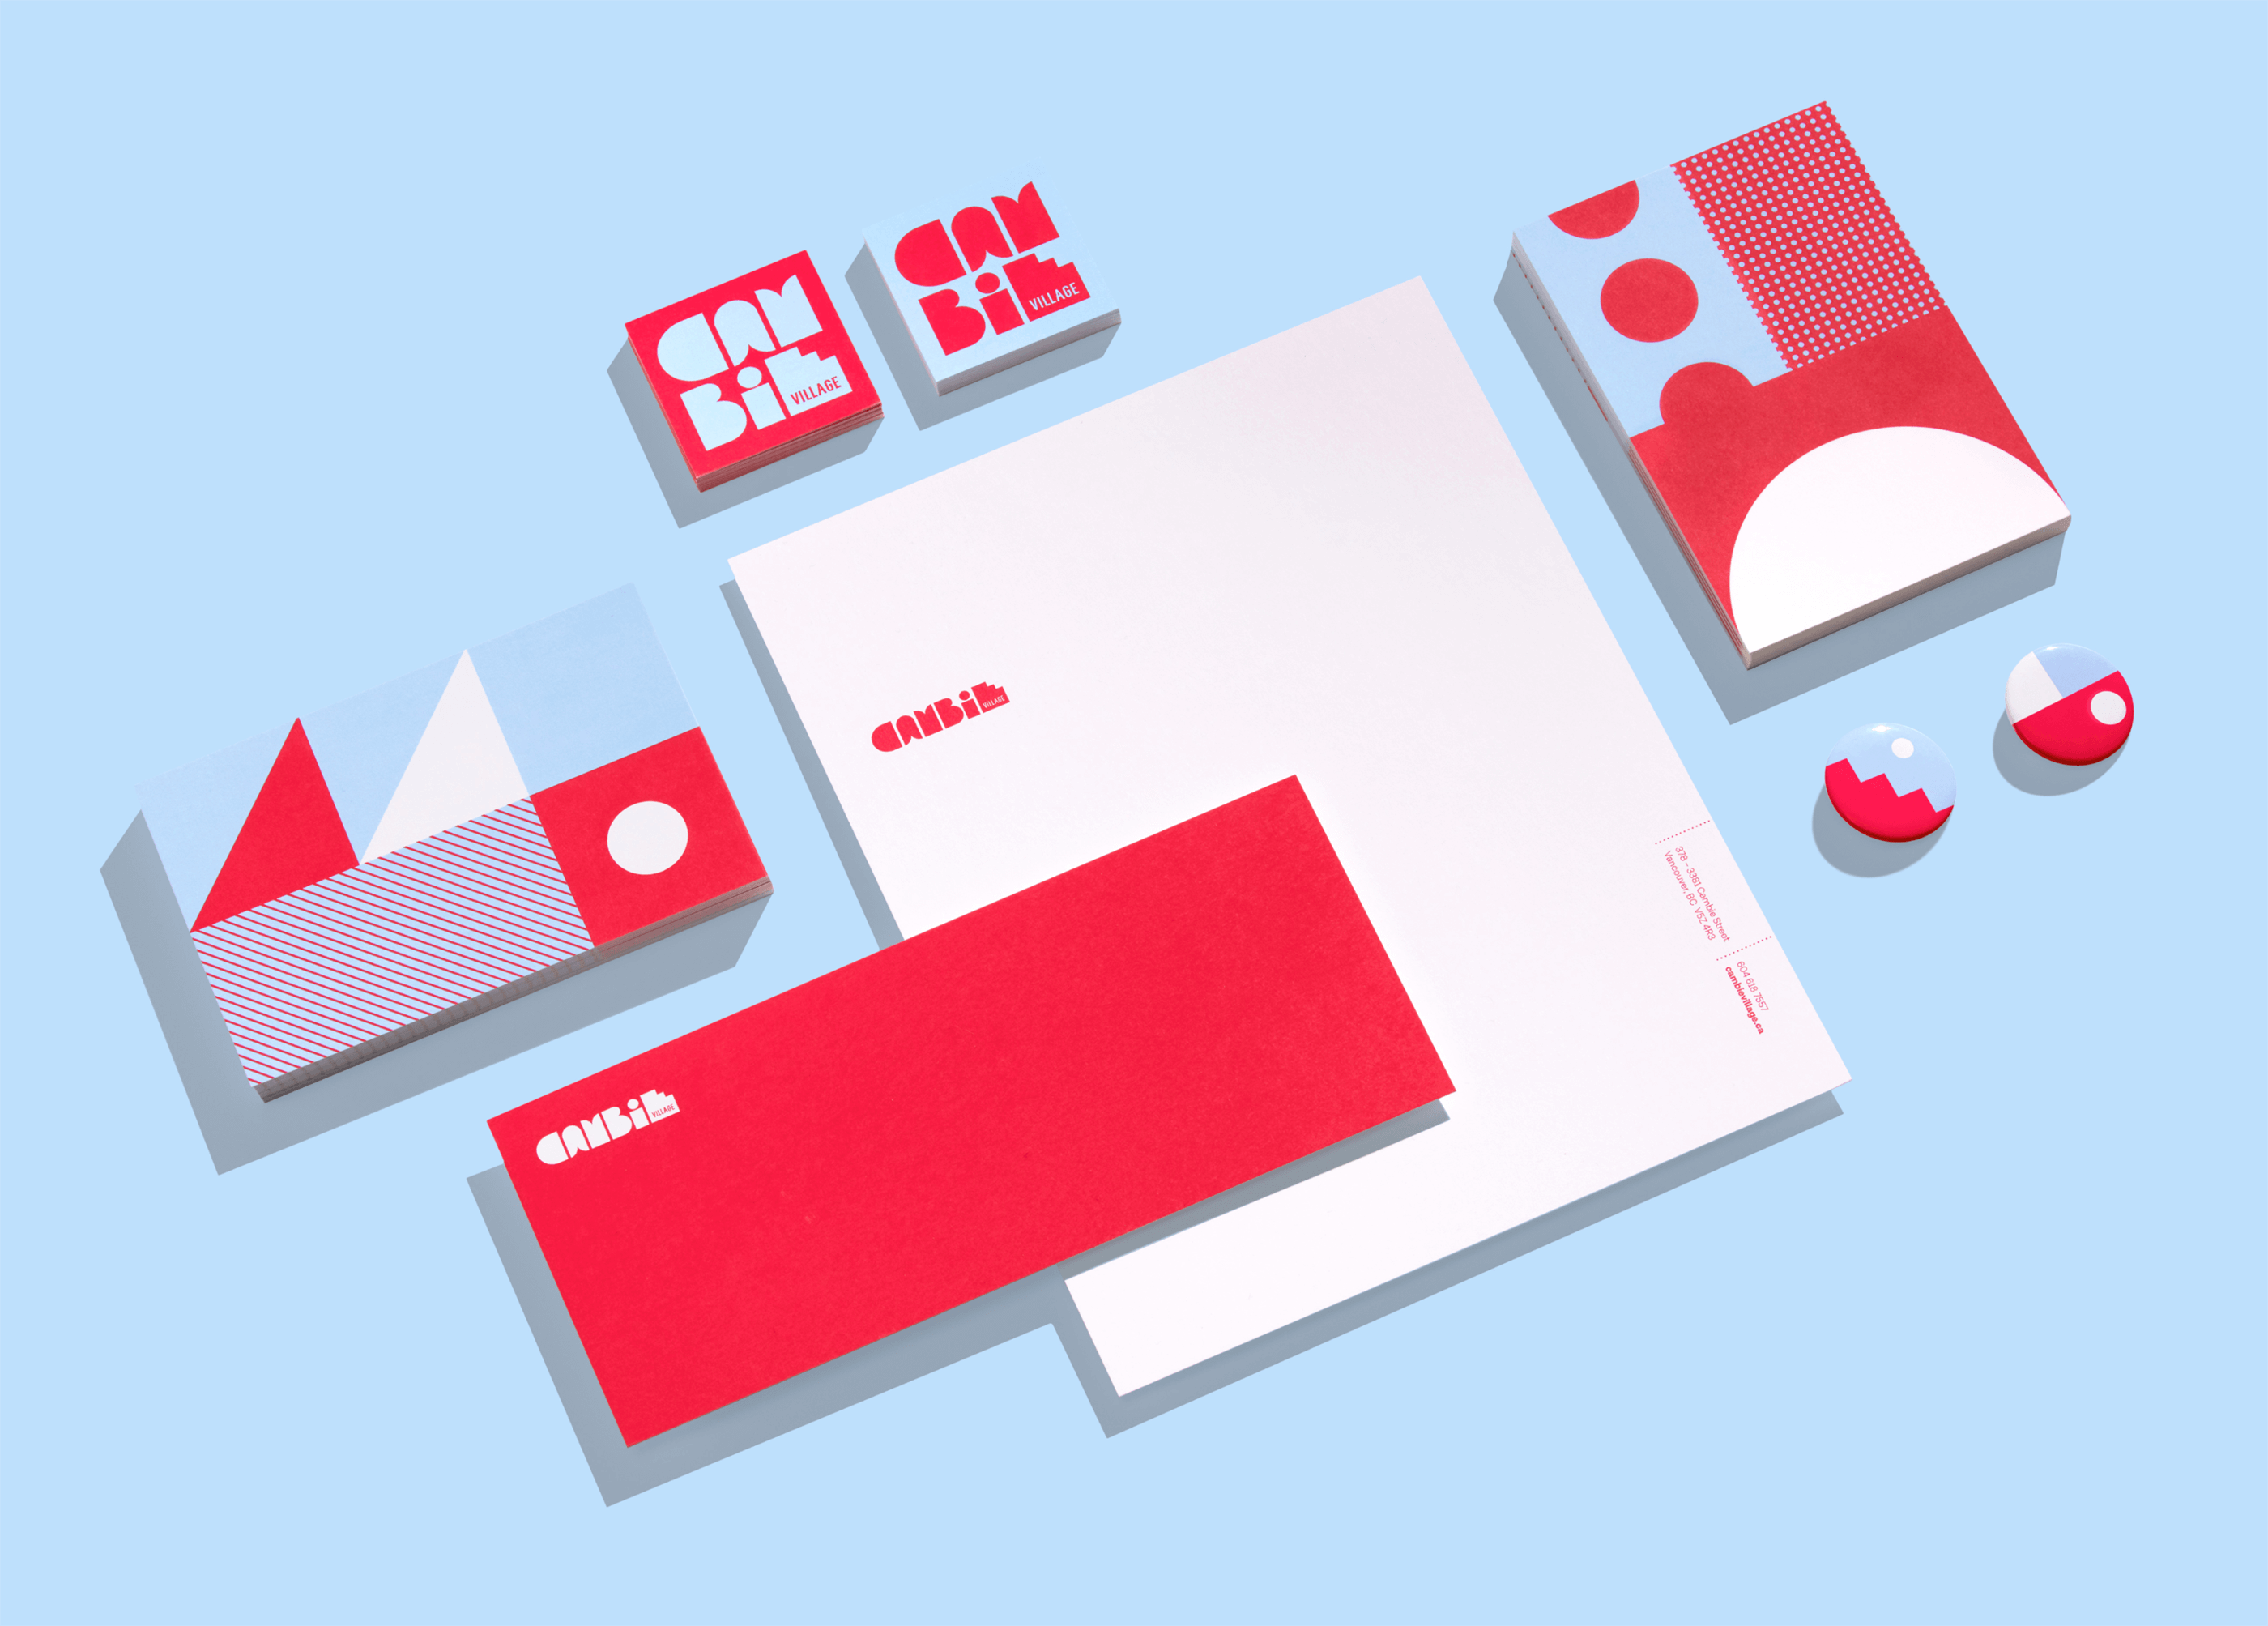 cambie village brand identity and stationery